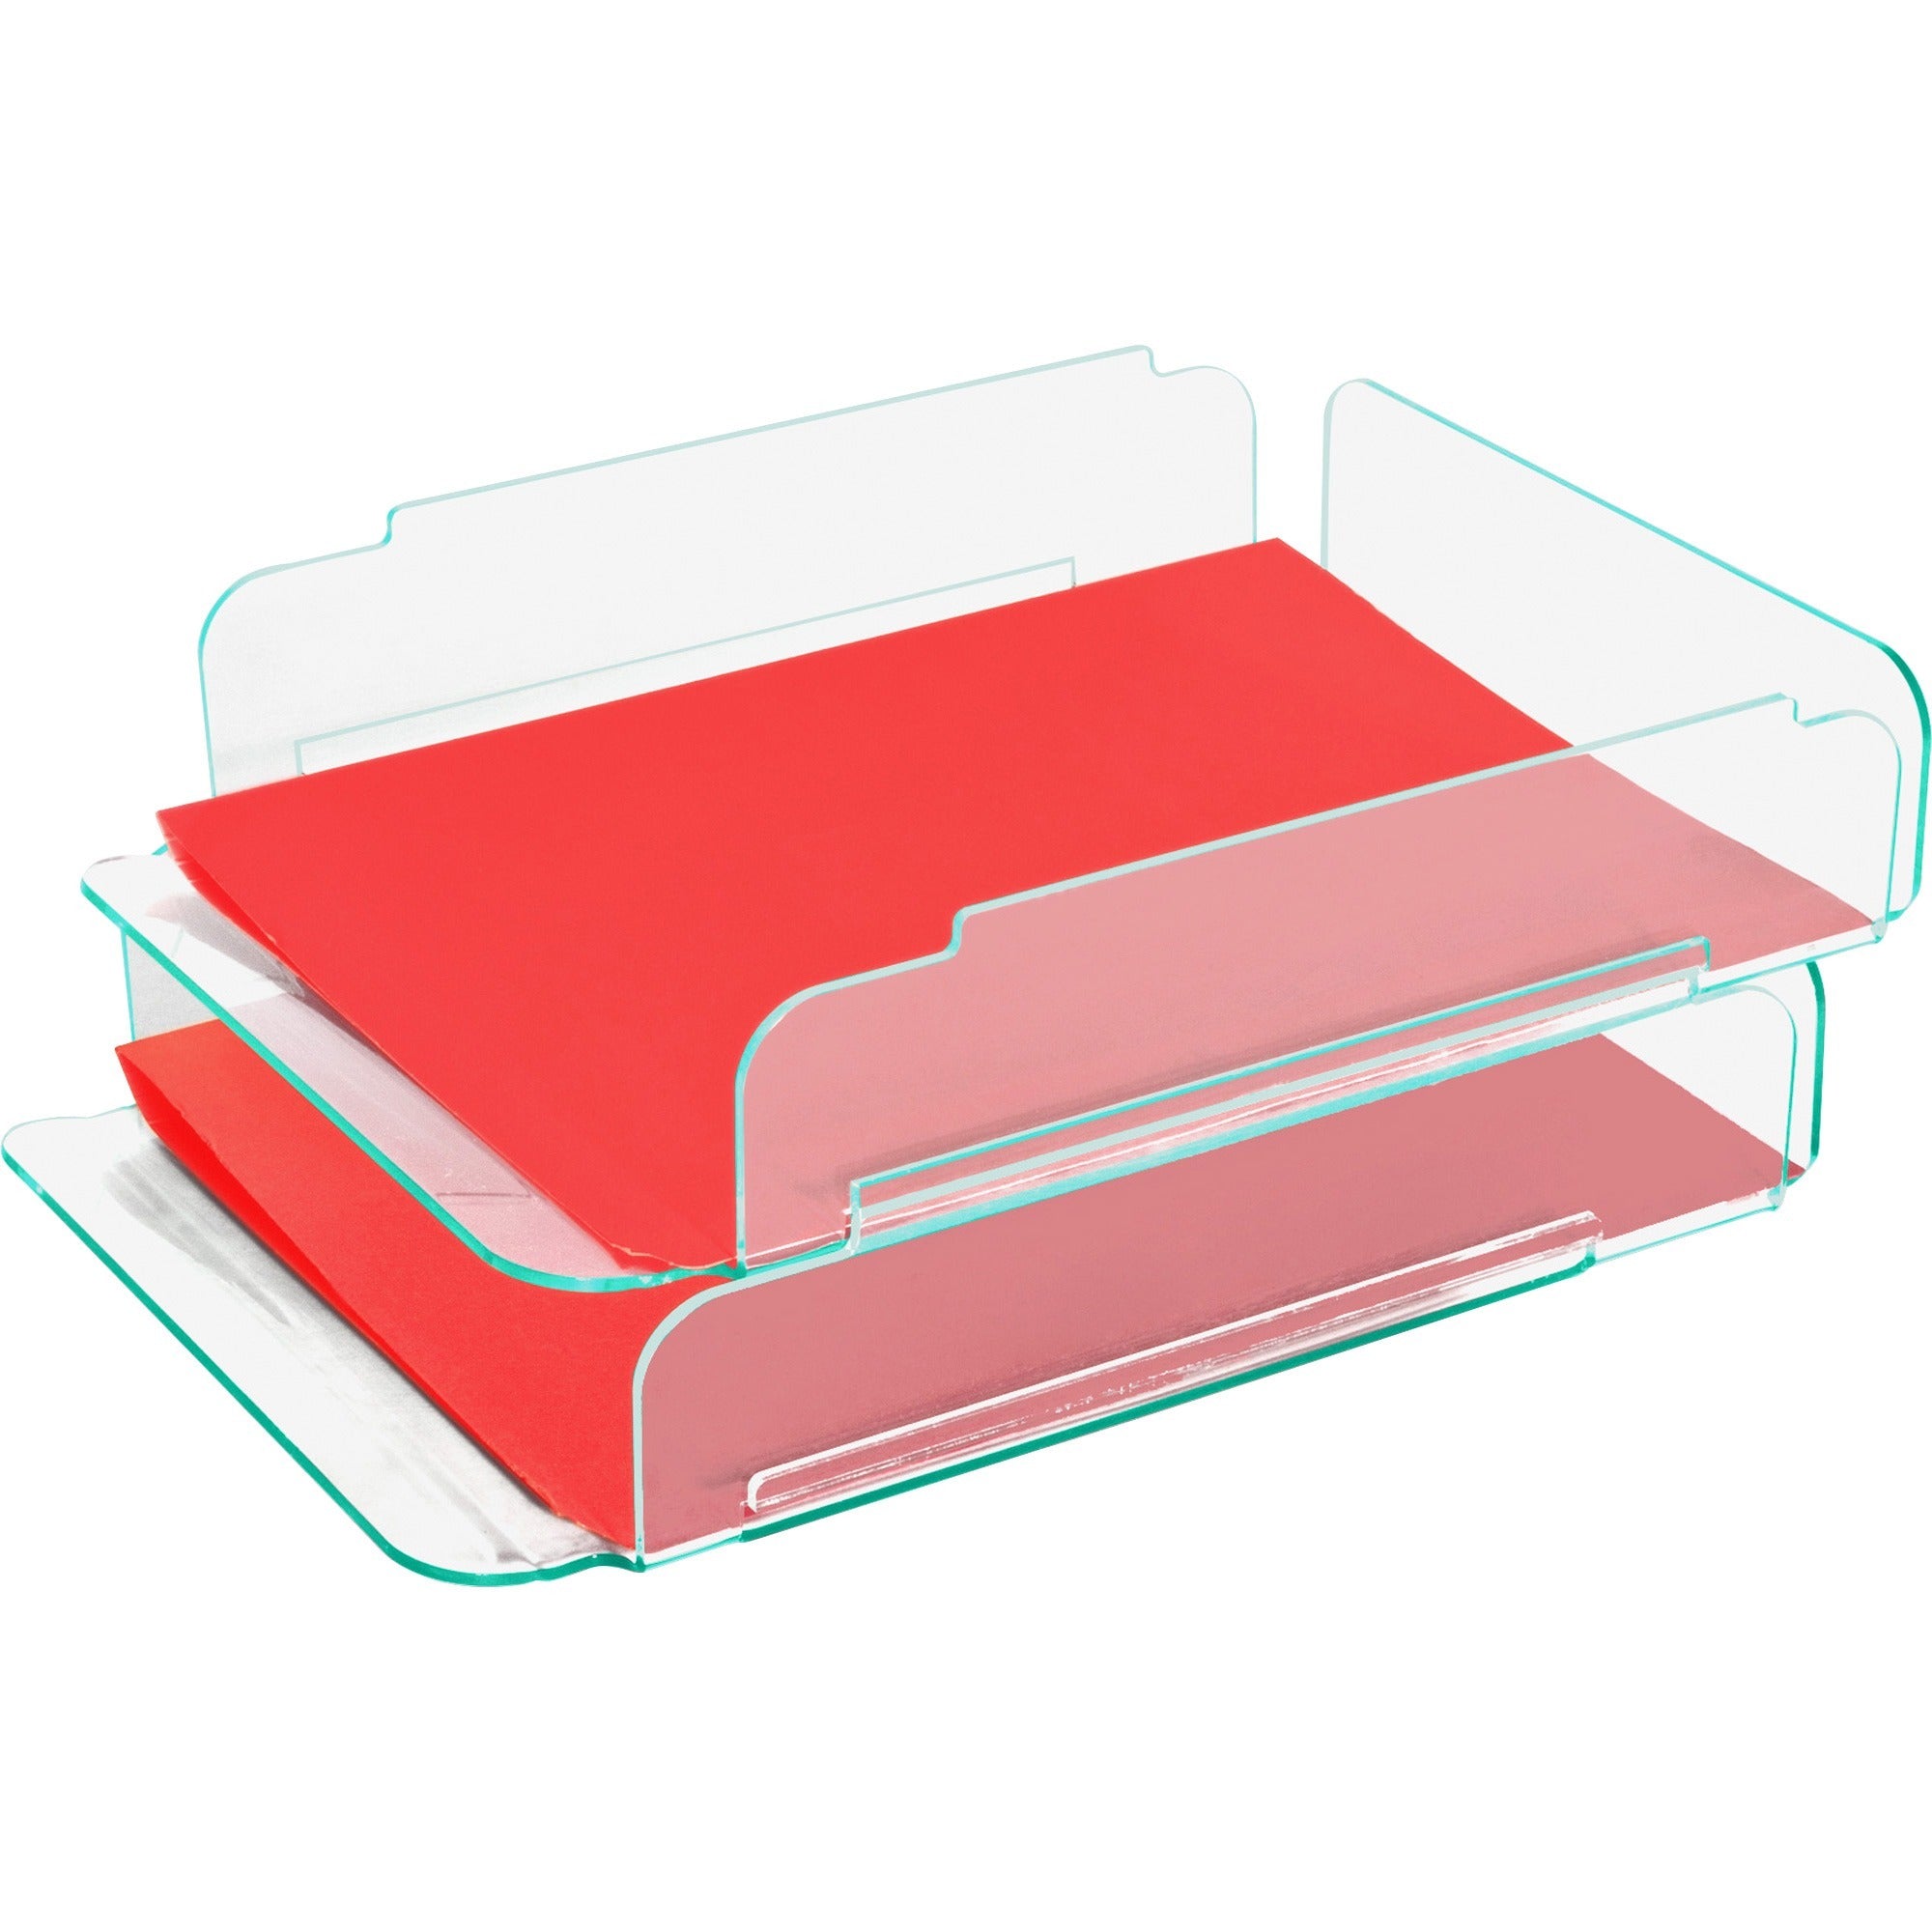 Lorell Stacking Document Trays - Desktop - Durable, Lightweight, Non-skid, Stackable - Clear - Acrylic - 1 Each - 